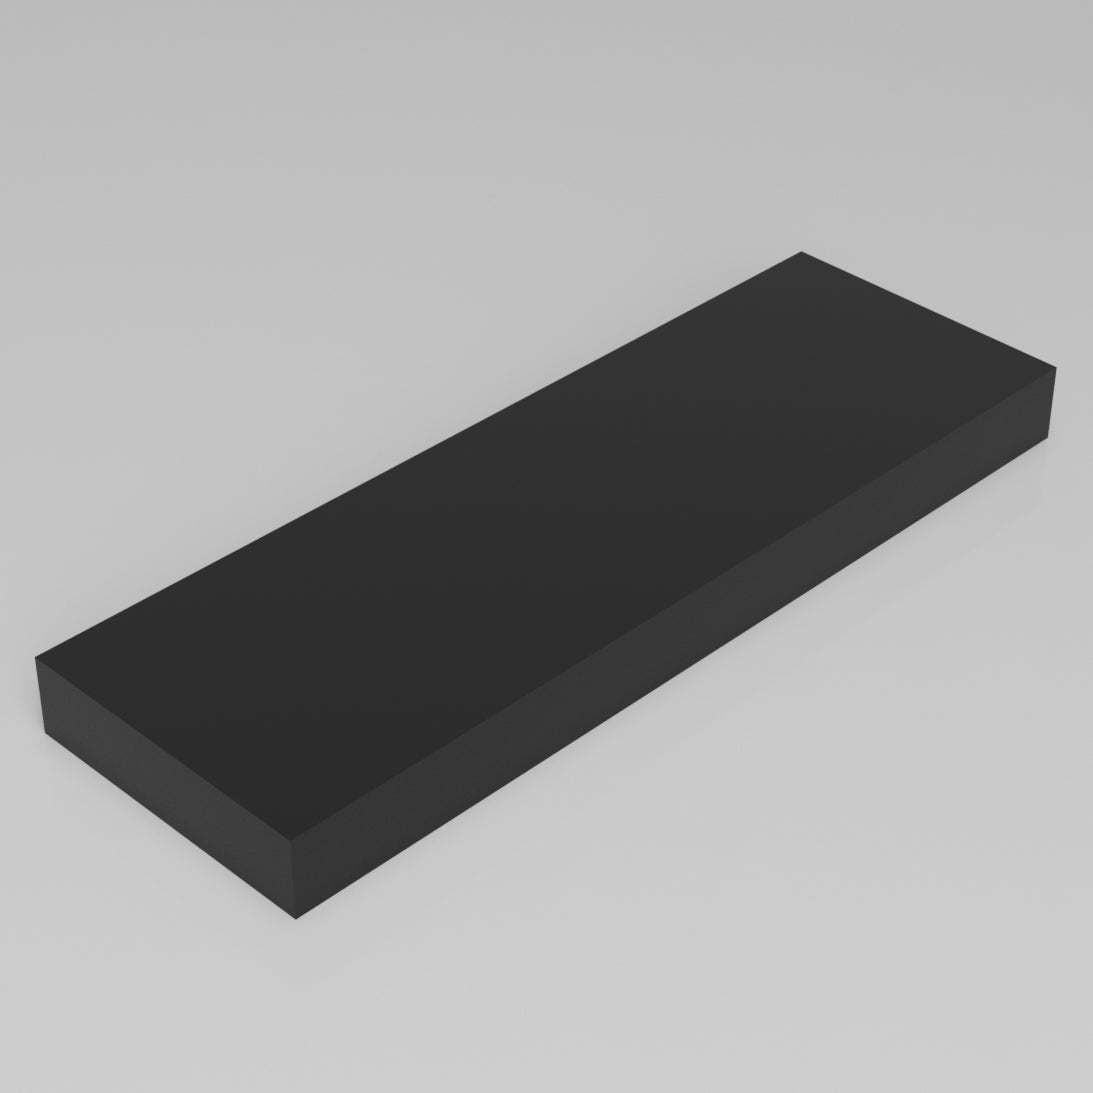 Machinable Wax Rectangular Block Front View 2 Inch by 8 Inch by 24 Inch